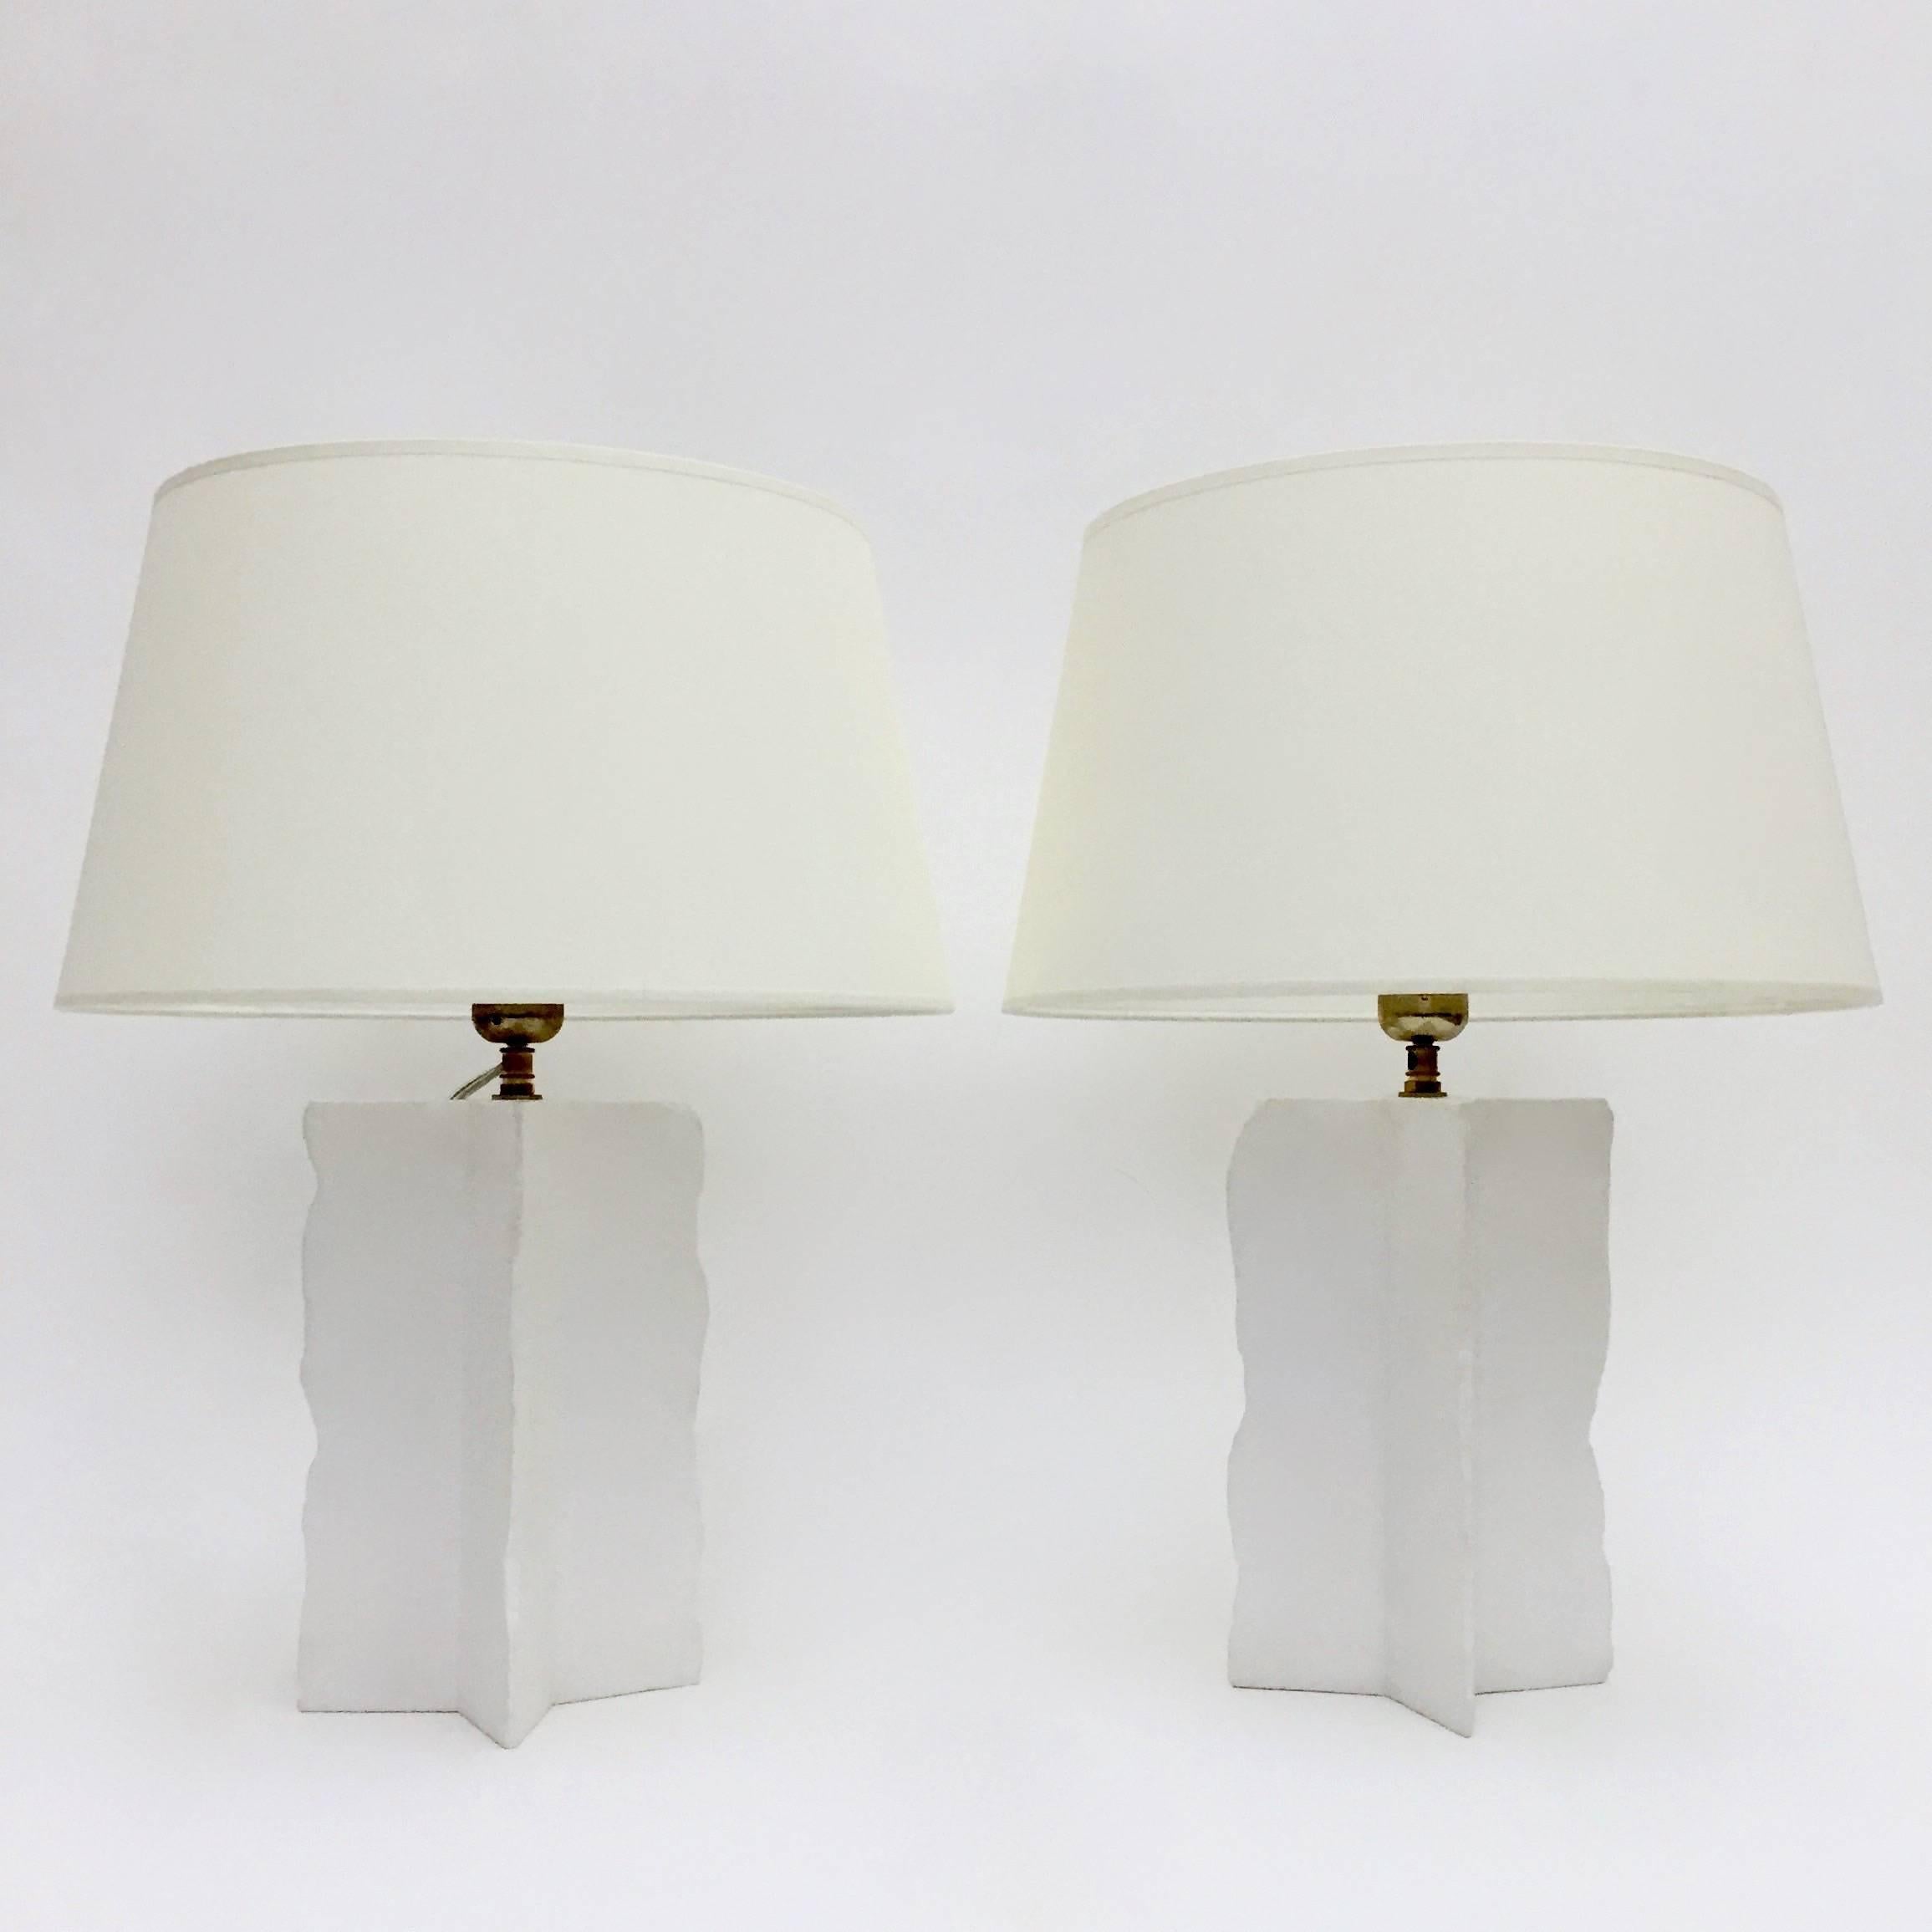 French Pair of White Plaster Lamp-Bases Forming a Cross